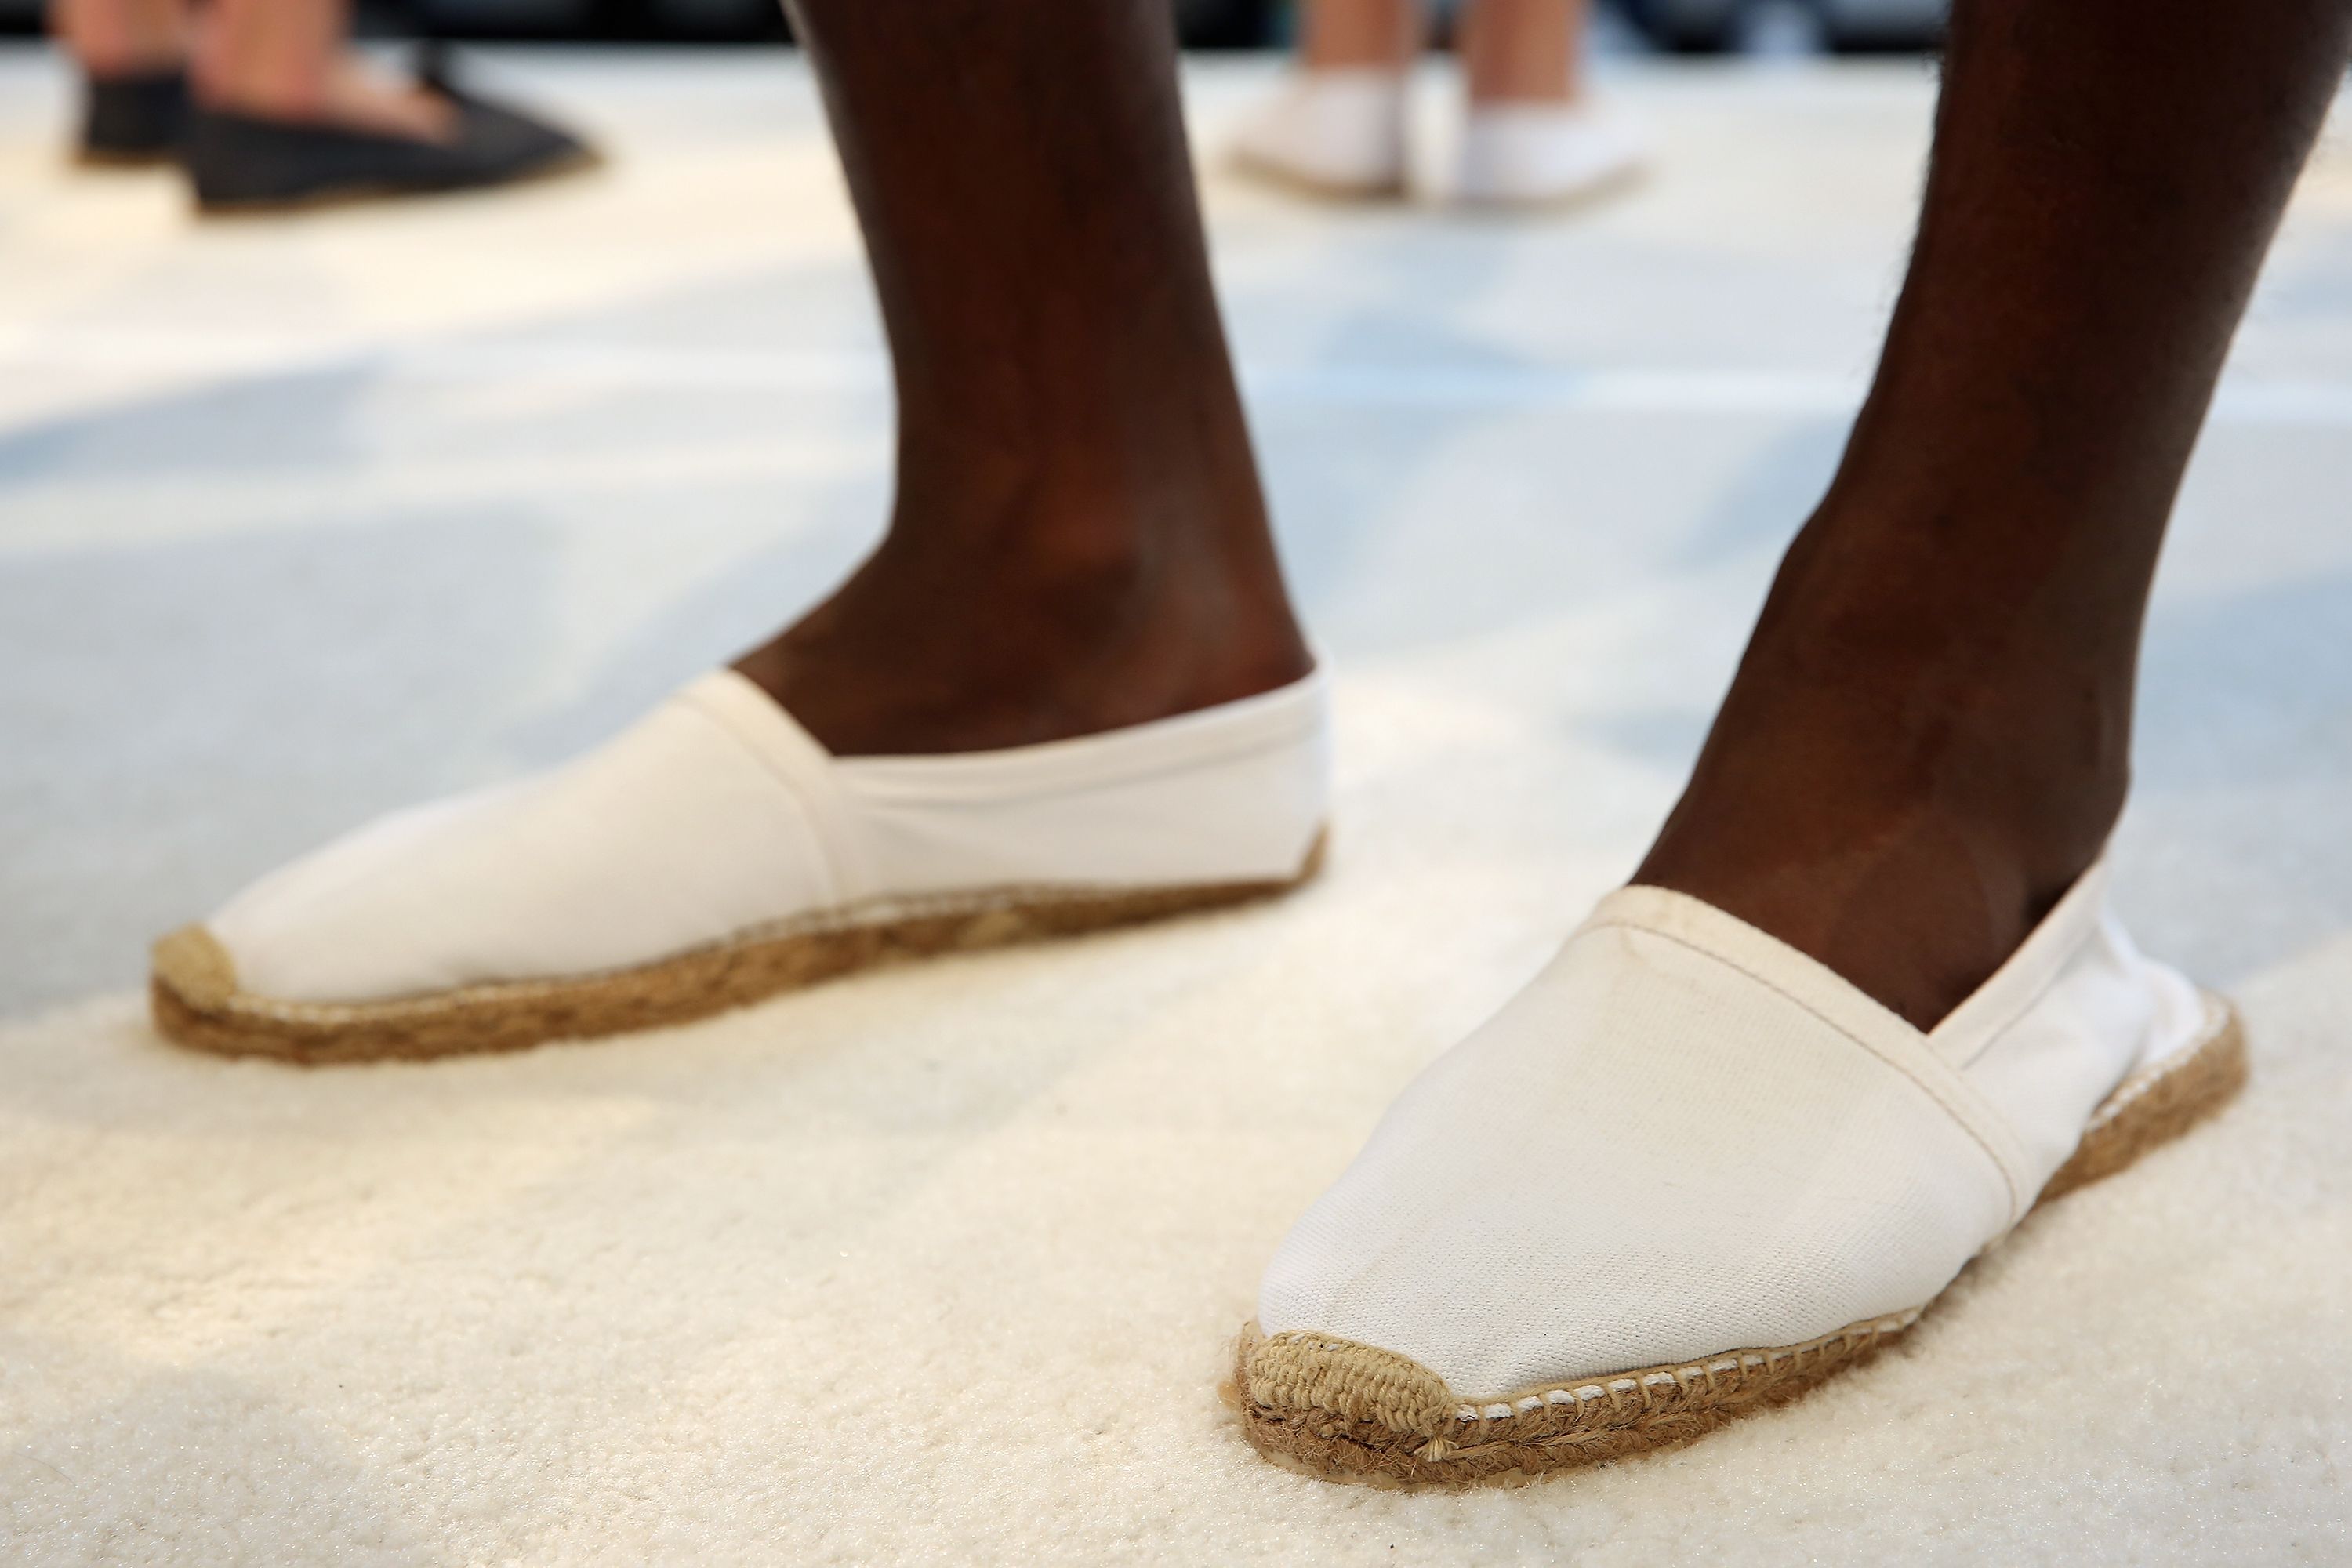 The History of Espadrilles